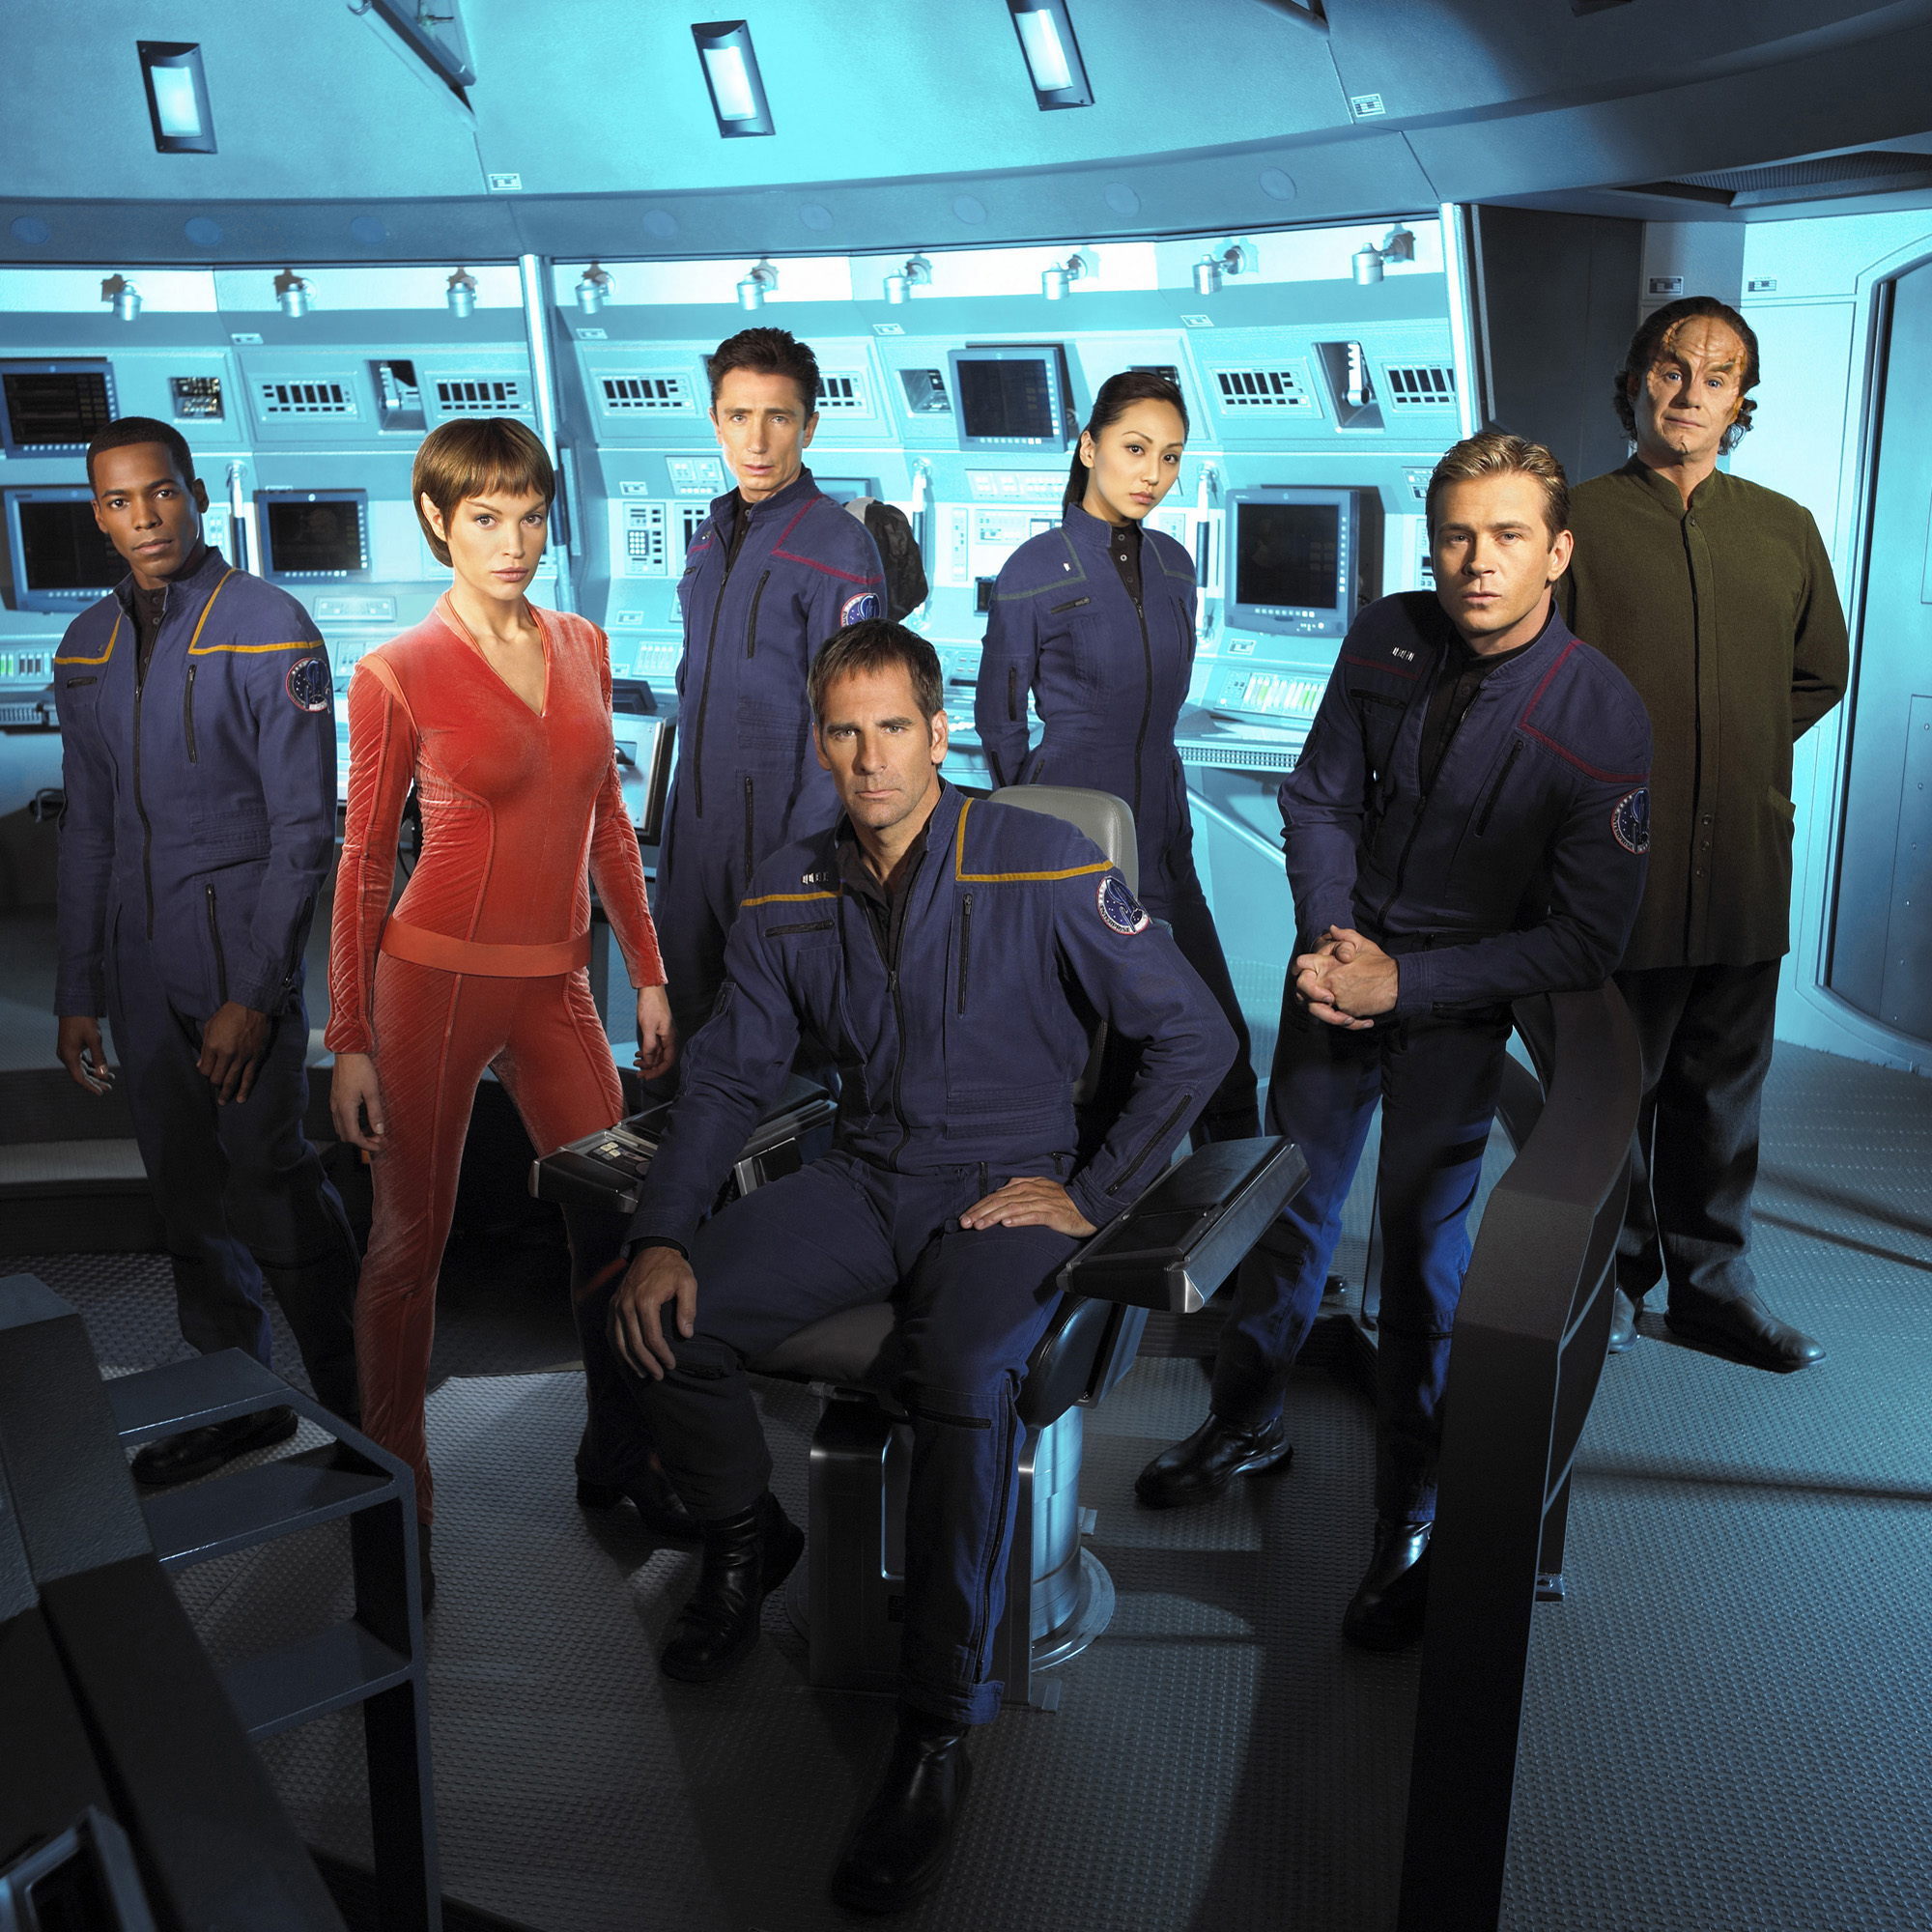 Promotional portrait of the cast of the UPN television series, 'Star Trek: Enterprise,' in costume and on set, 2003. L-R: Anthony Montgomery, Jolene Blalock, Dominic Keating, Scott Bakula, Linda Park, Connor Trinneer and John Billingsley. (Photo by James Sorenson/CBS Photo Archive/Getty Images) (CBS Photo Archive—CBS via Getty Images)